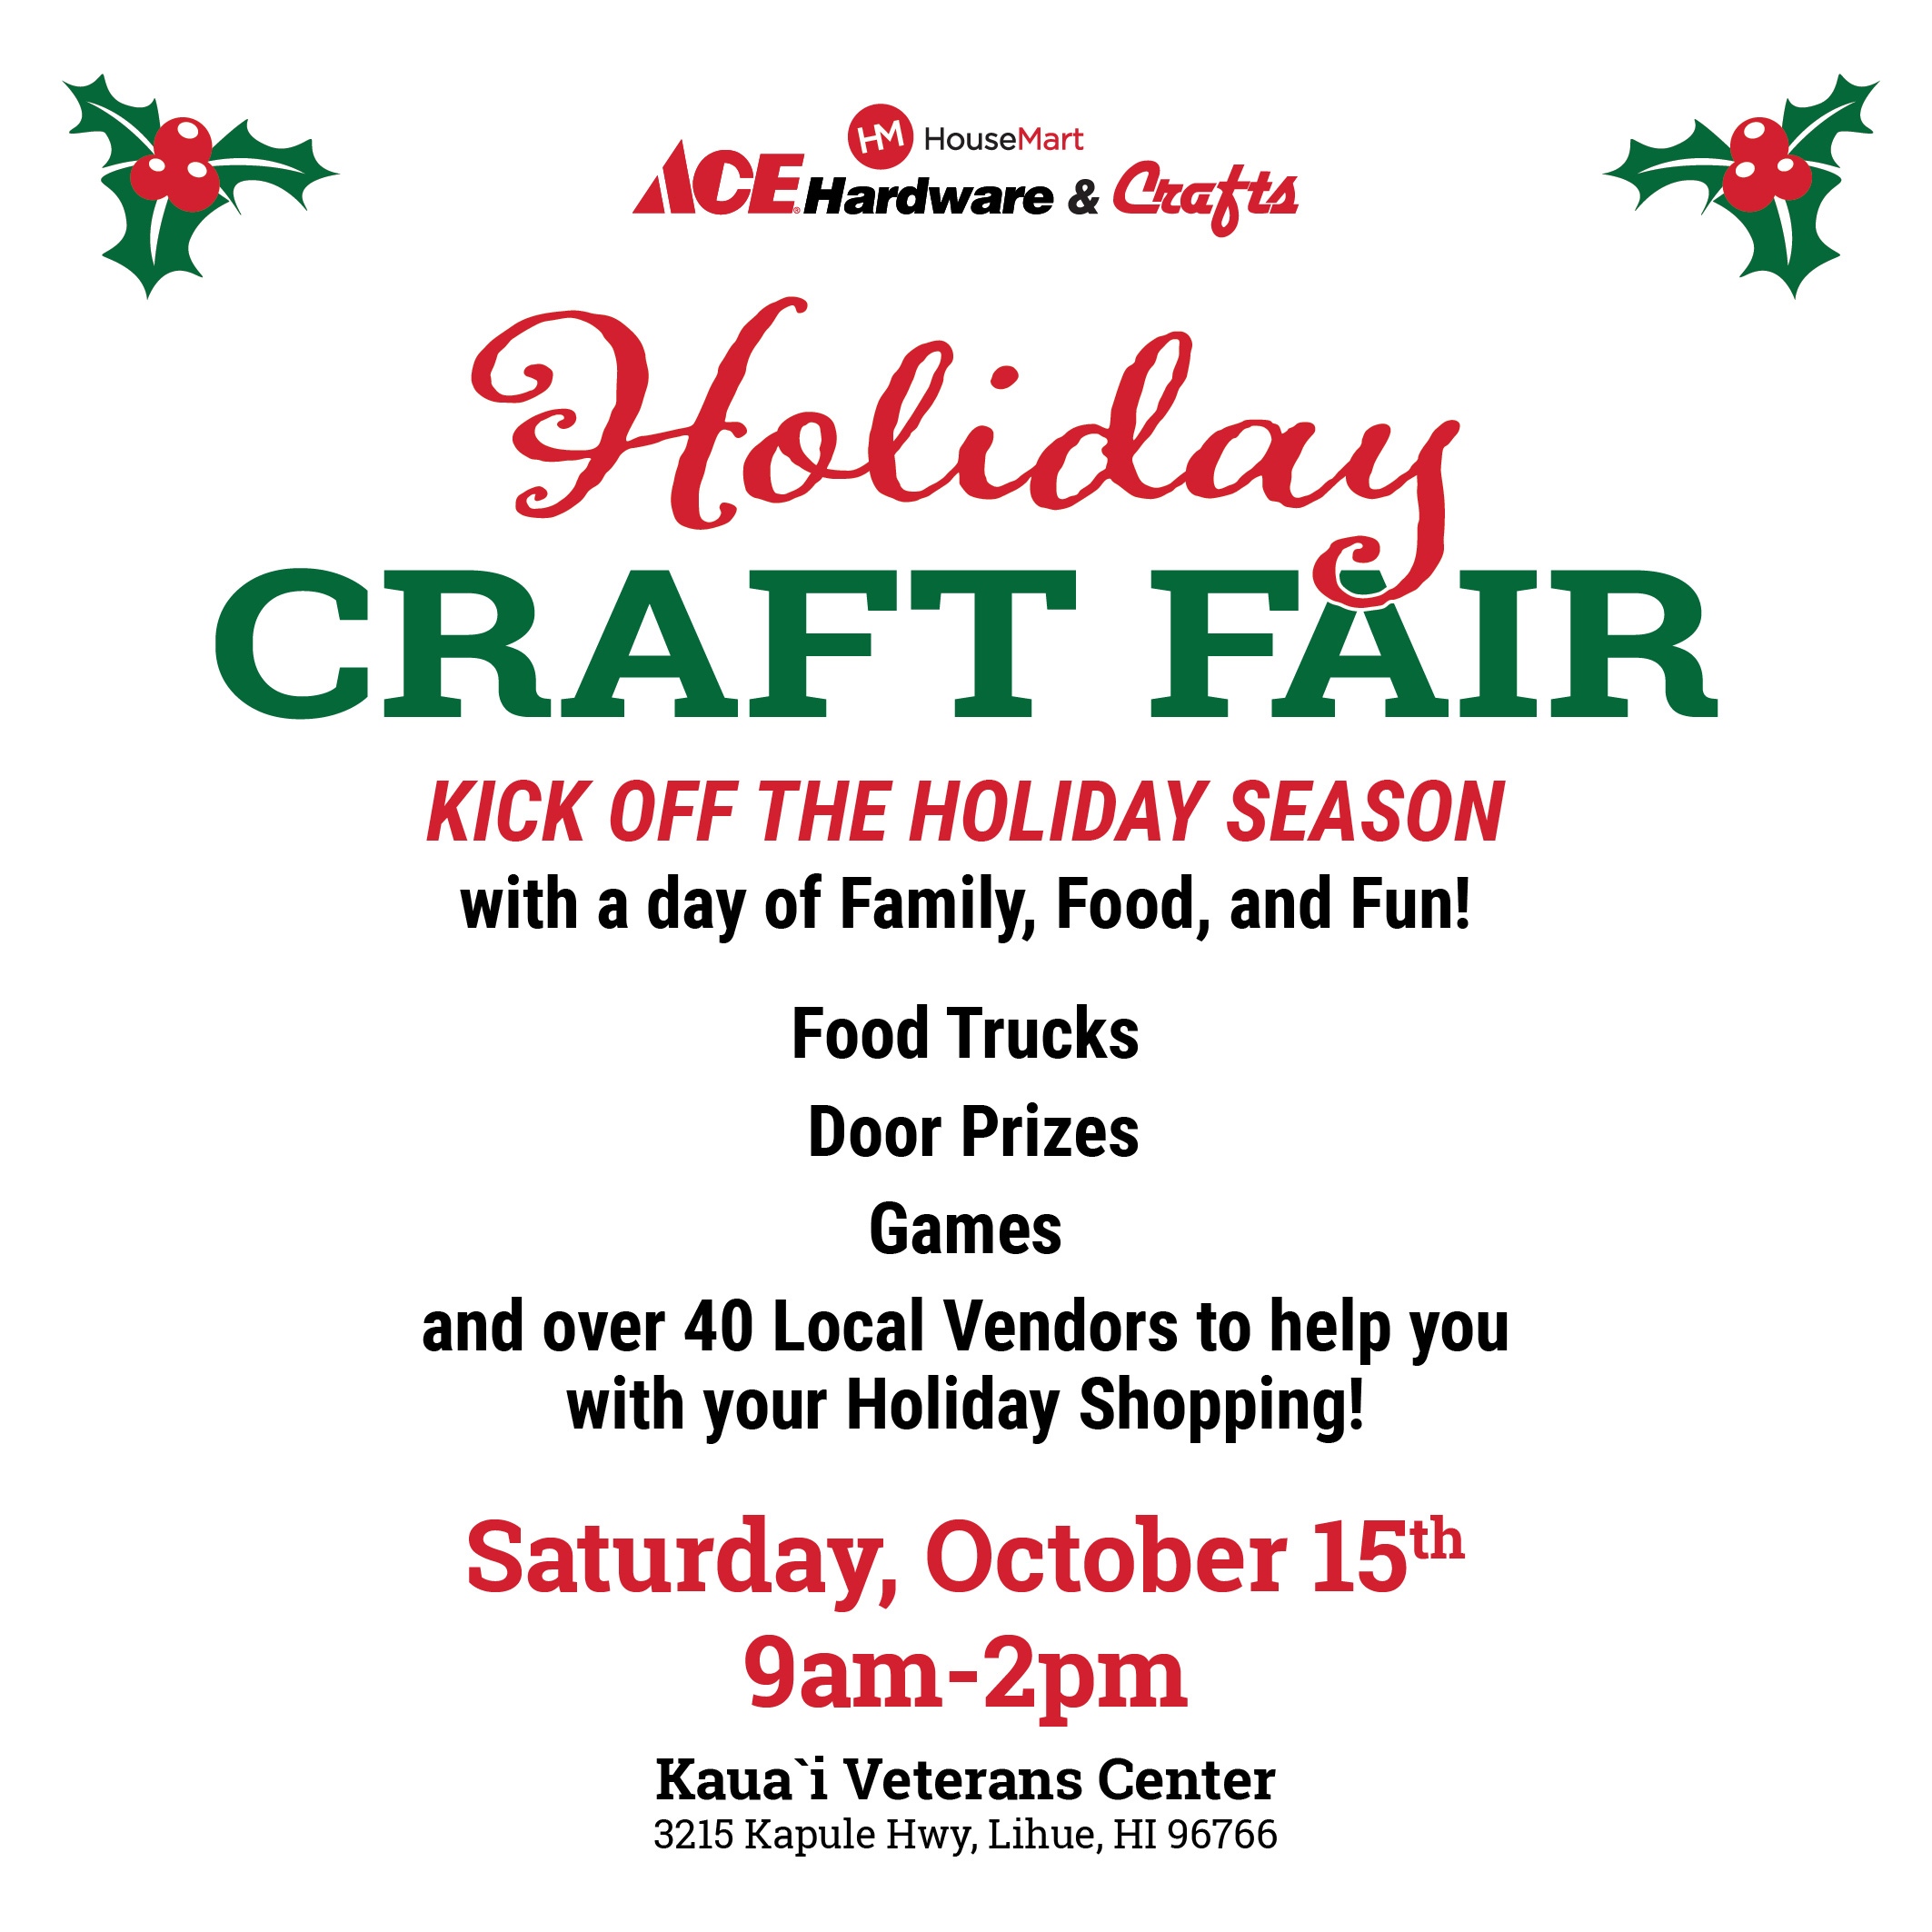 Lihue's
Holiday Craft Fair
Sat. 10/15
9am-2pm